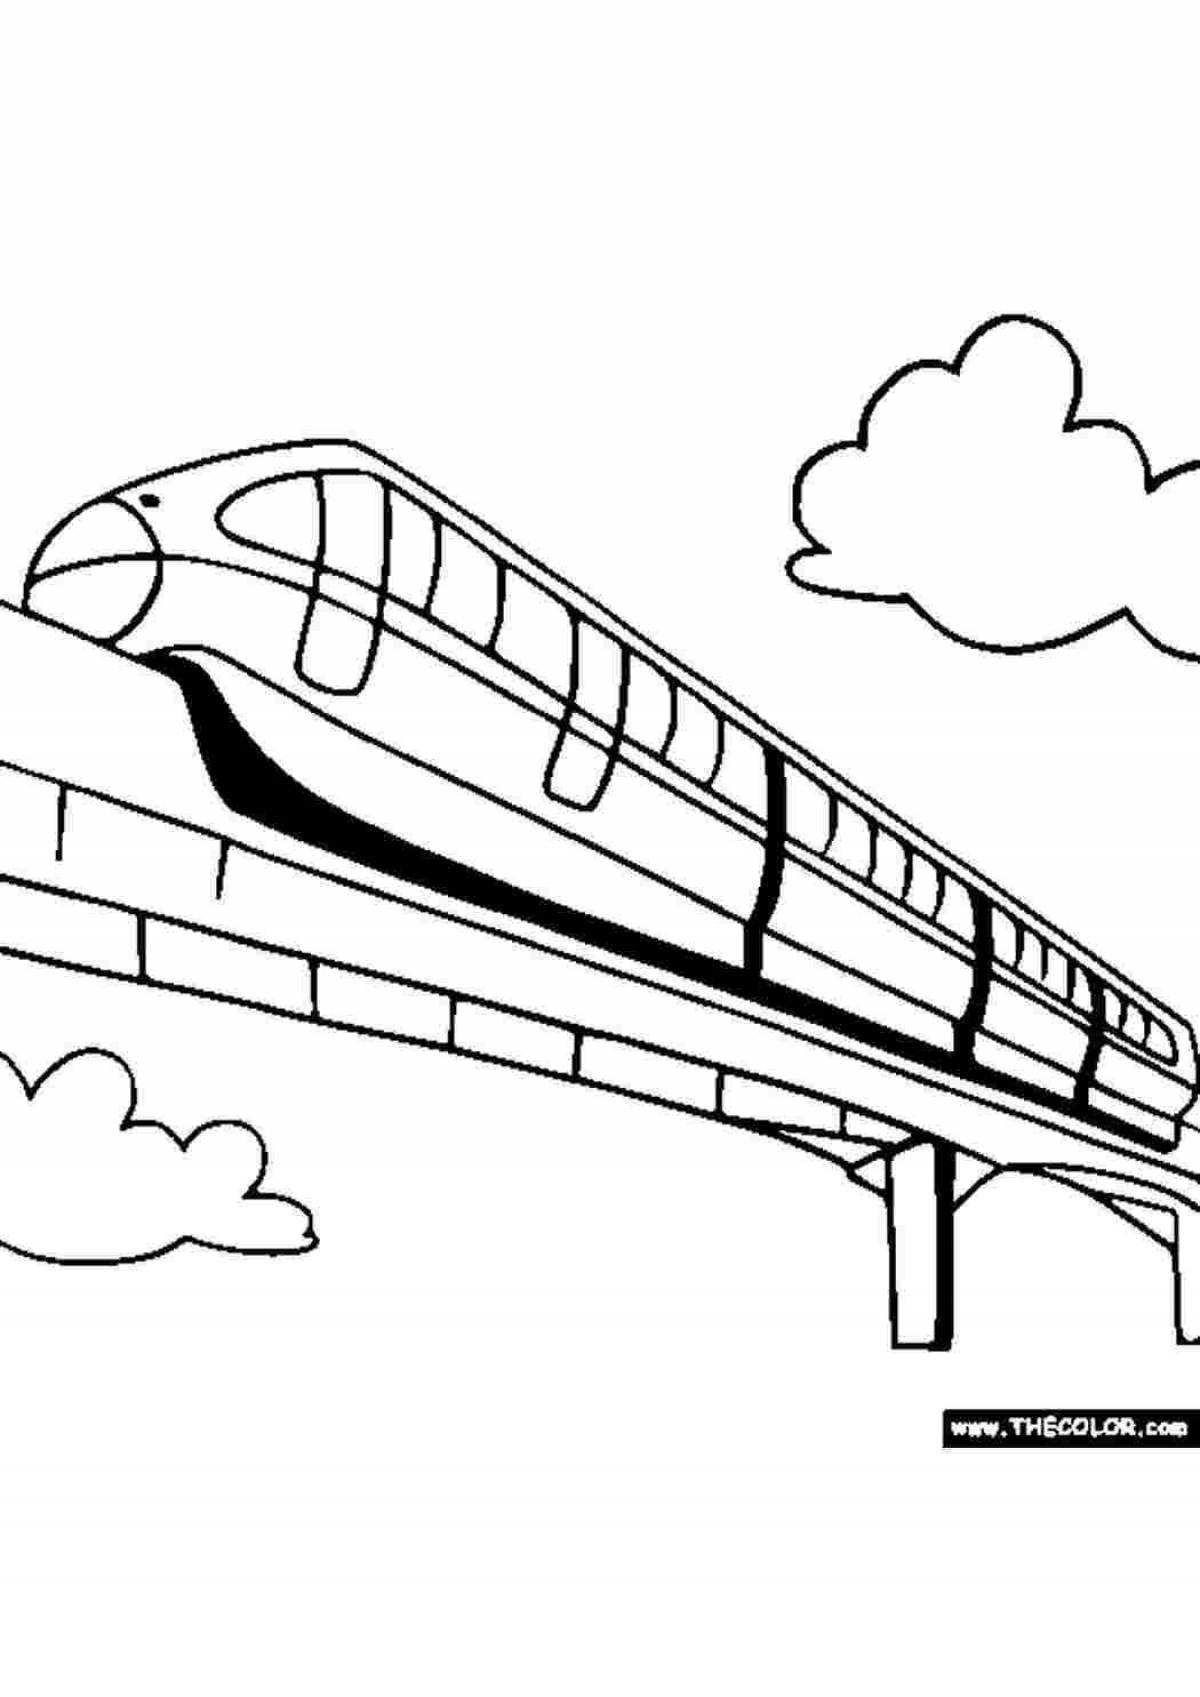 Exquisite high-speed train coloring page